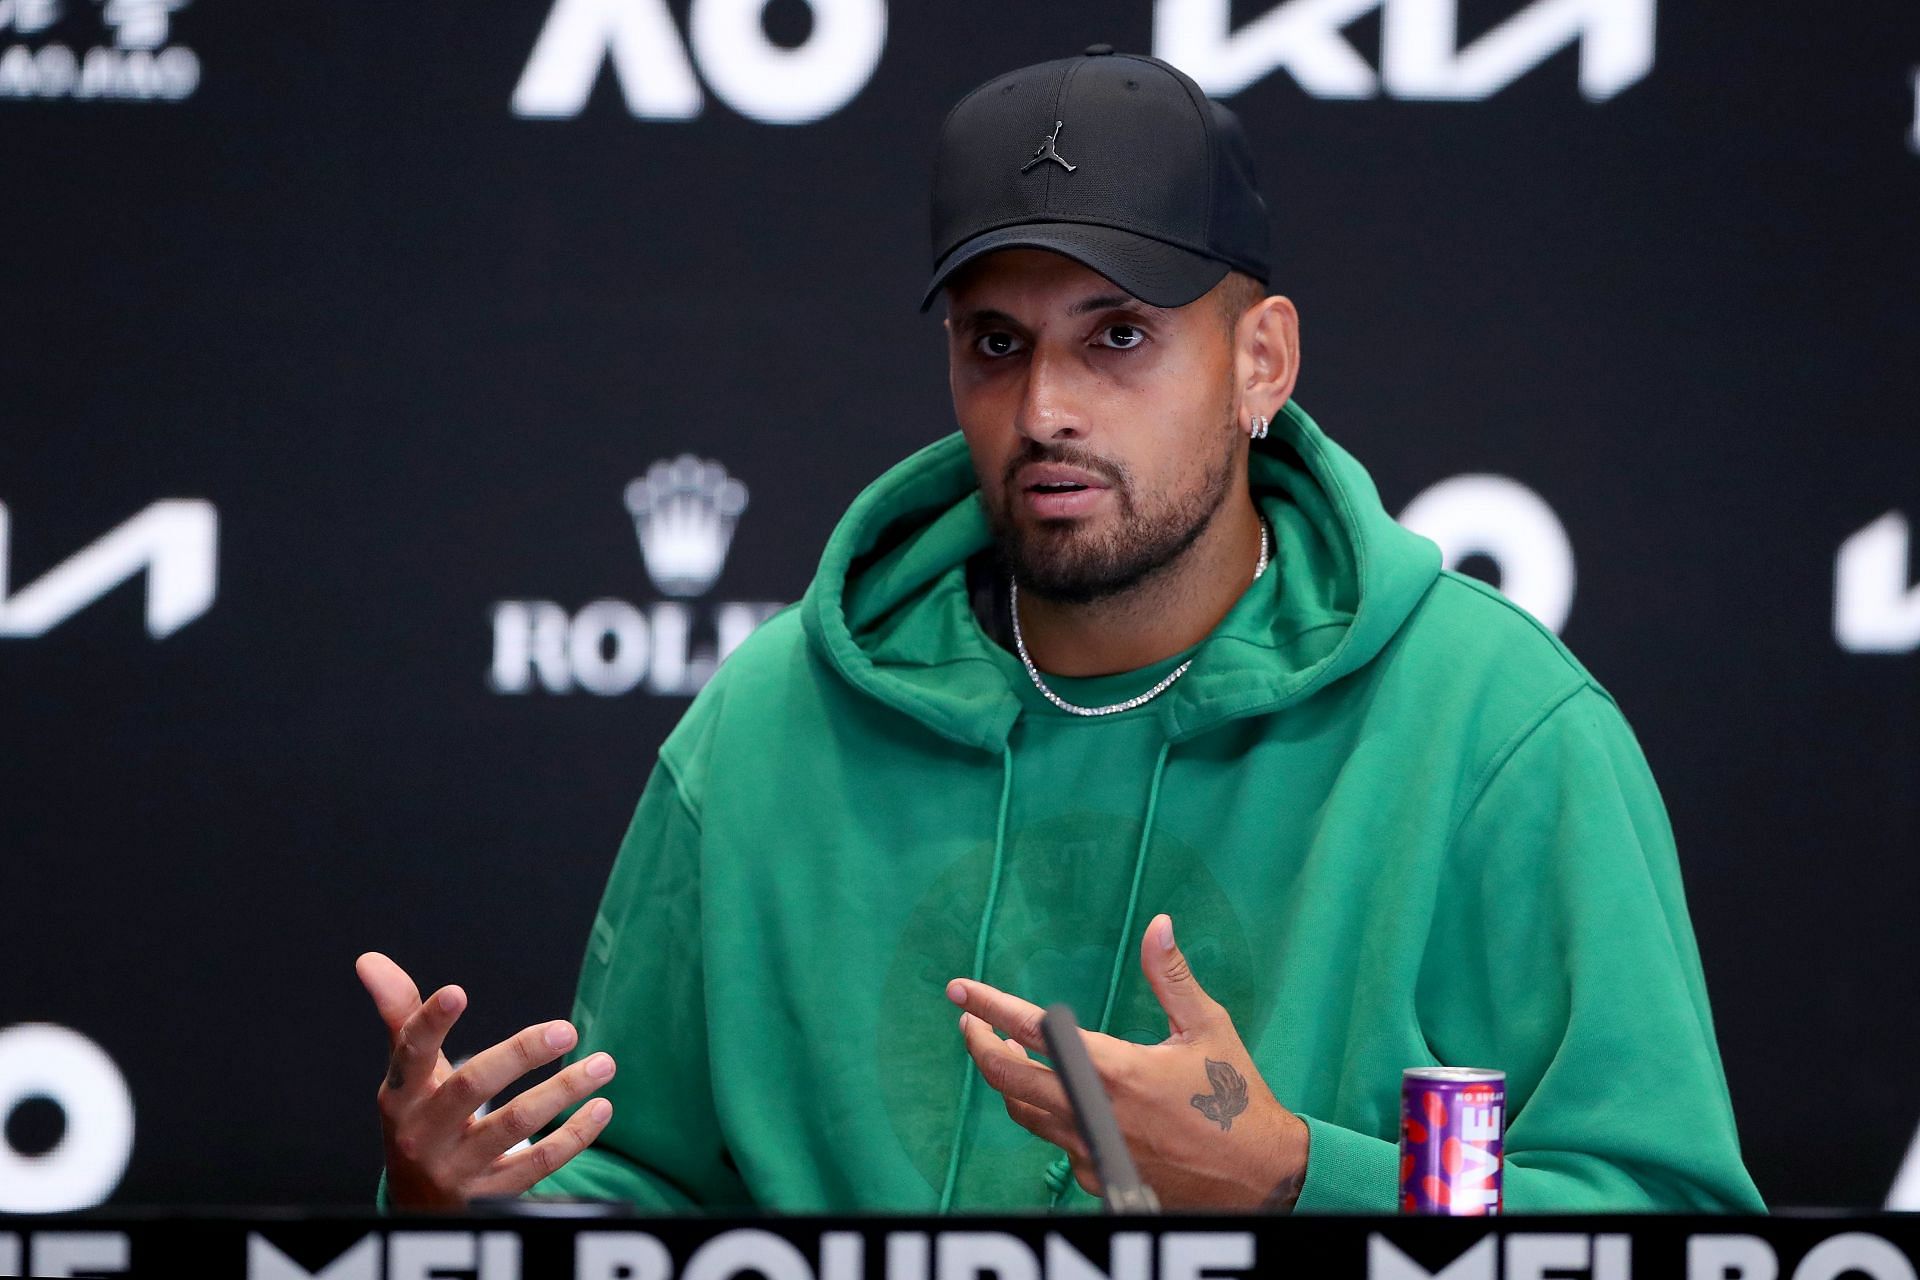 Nick Kyrgios interacts with the media at the 2023 Australian Open